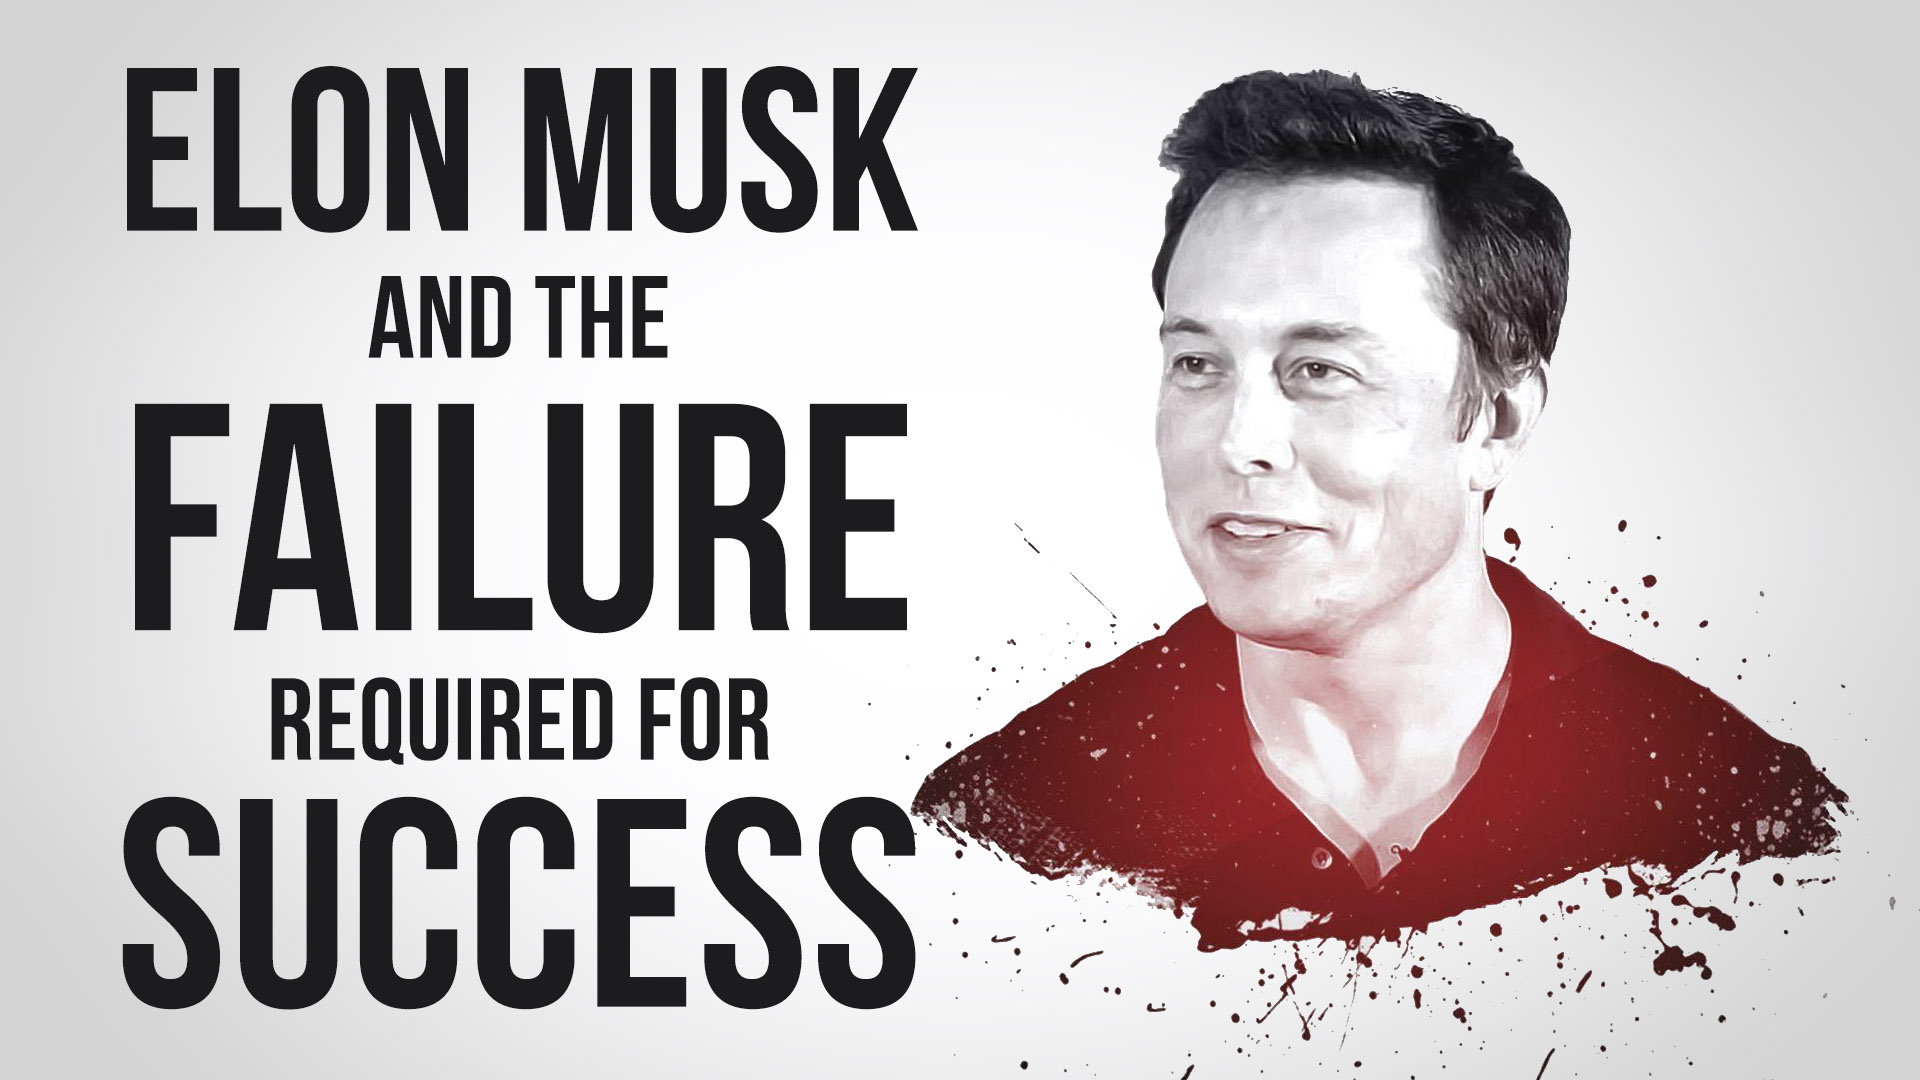 Elon Musk and the Failure Required for Success